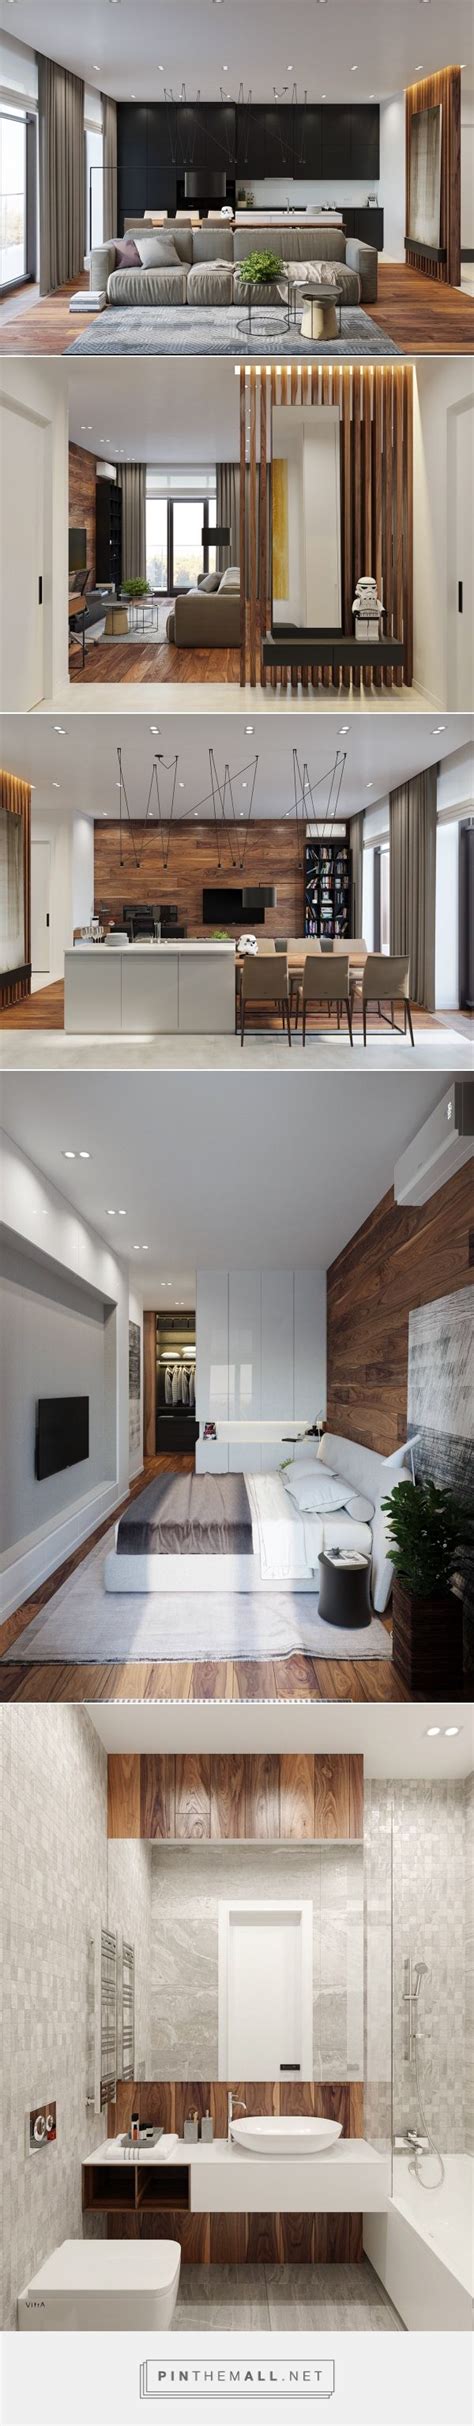 The Interior And Exterior Of A Modern House